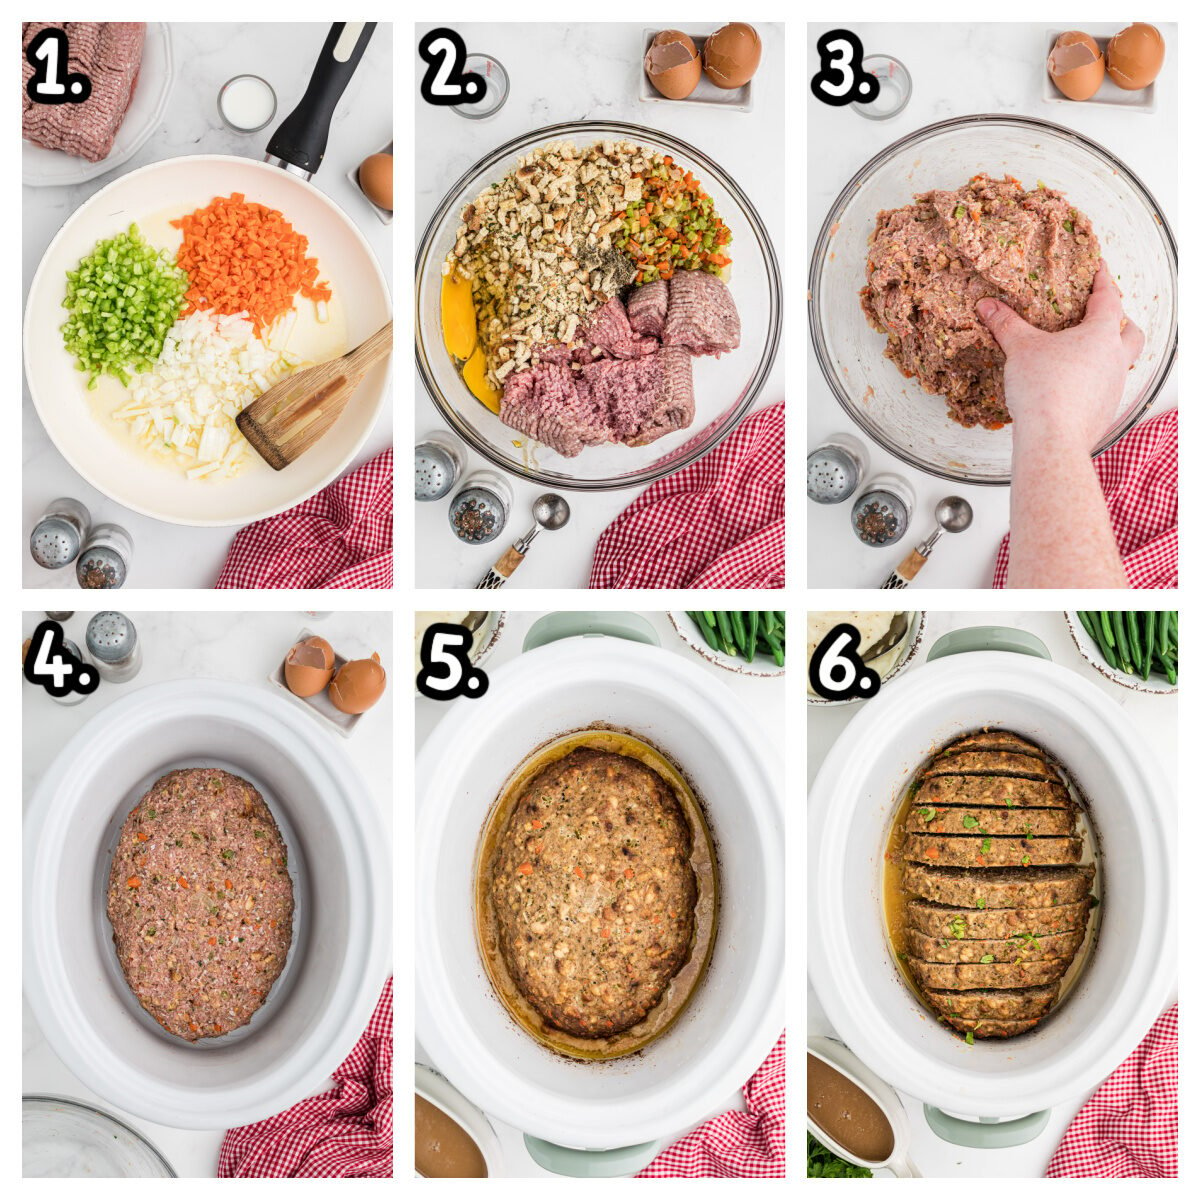 6 images showing how to make turkey meatloaf in a slow cooker.